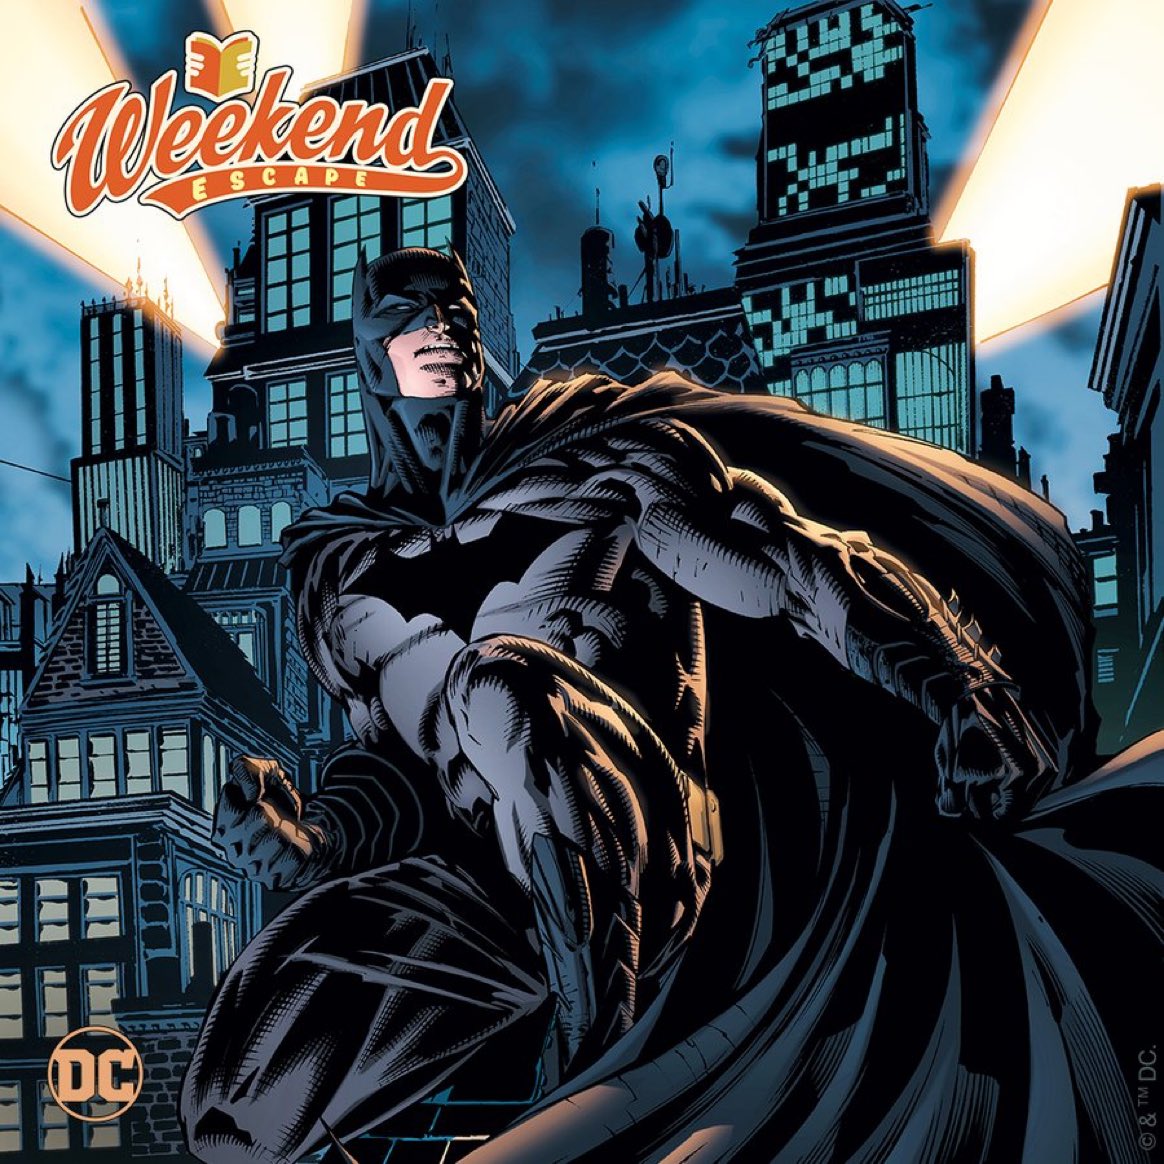 Spooky season is upon us, which makes it the perfect time to lose a bit of sleep over one of Scarecrow’s most terrifying tales in BATMAN: THE DARK KNIGHT VOL. 2: CYCLE OF VIOLENCE, our pick for your #DCWeekendEscape! bit.ly/3PTlZsB